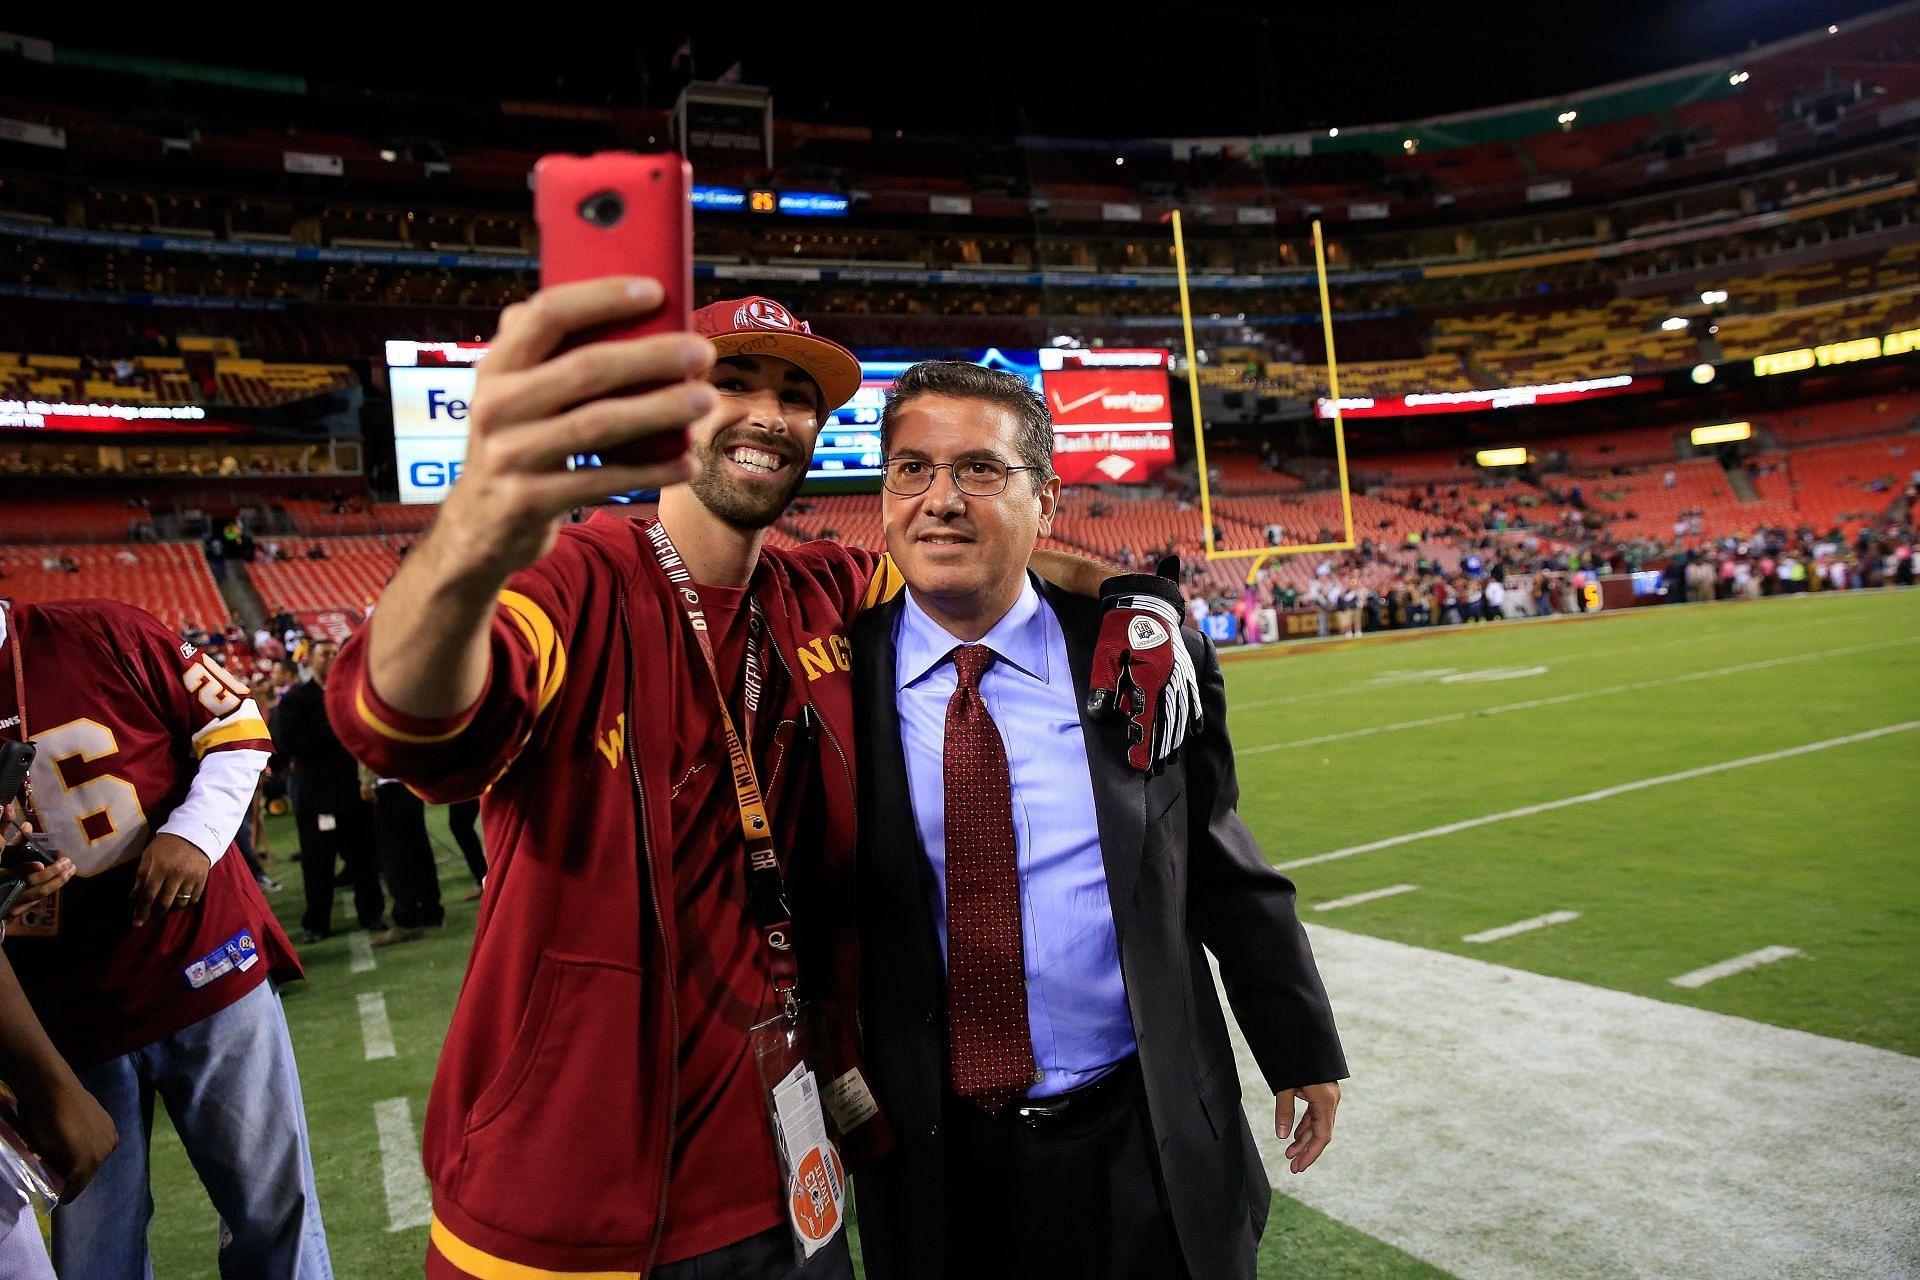 Dan Snyder bought the team in 1999